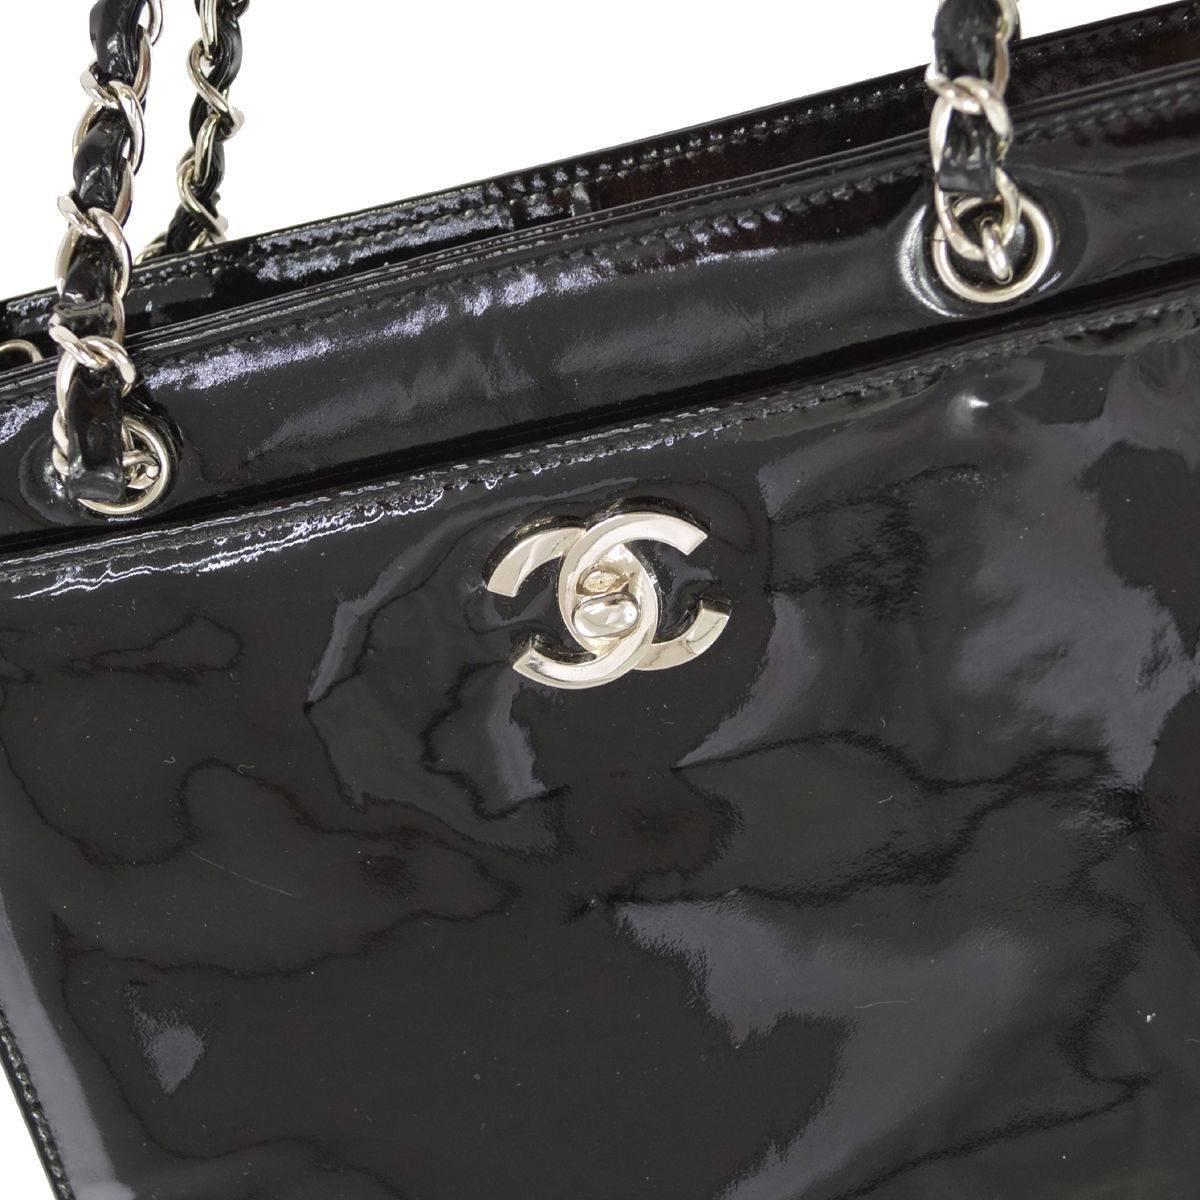 Chanel Black Patent Leather Small Shopper Evening Top Handle Bag 

Patent
Silver tone hardware
Zipper closure
Leather lining
Made in France
Date code 5024232
Strap drop 9